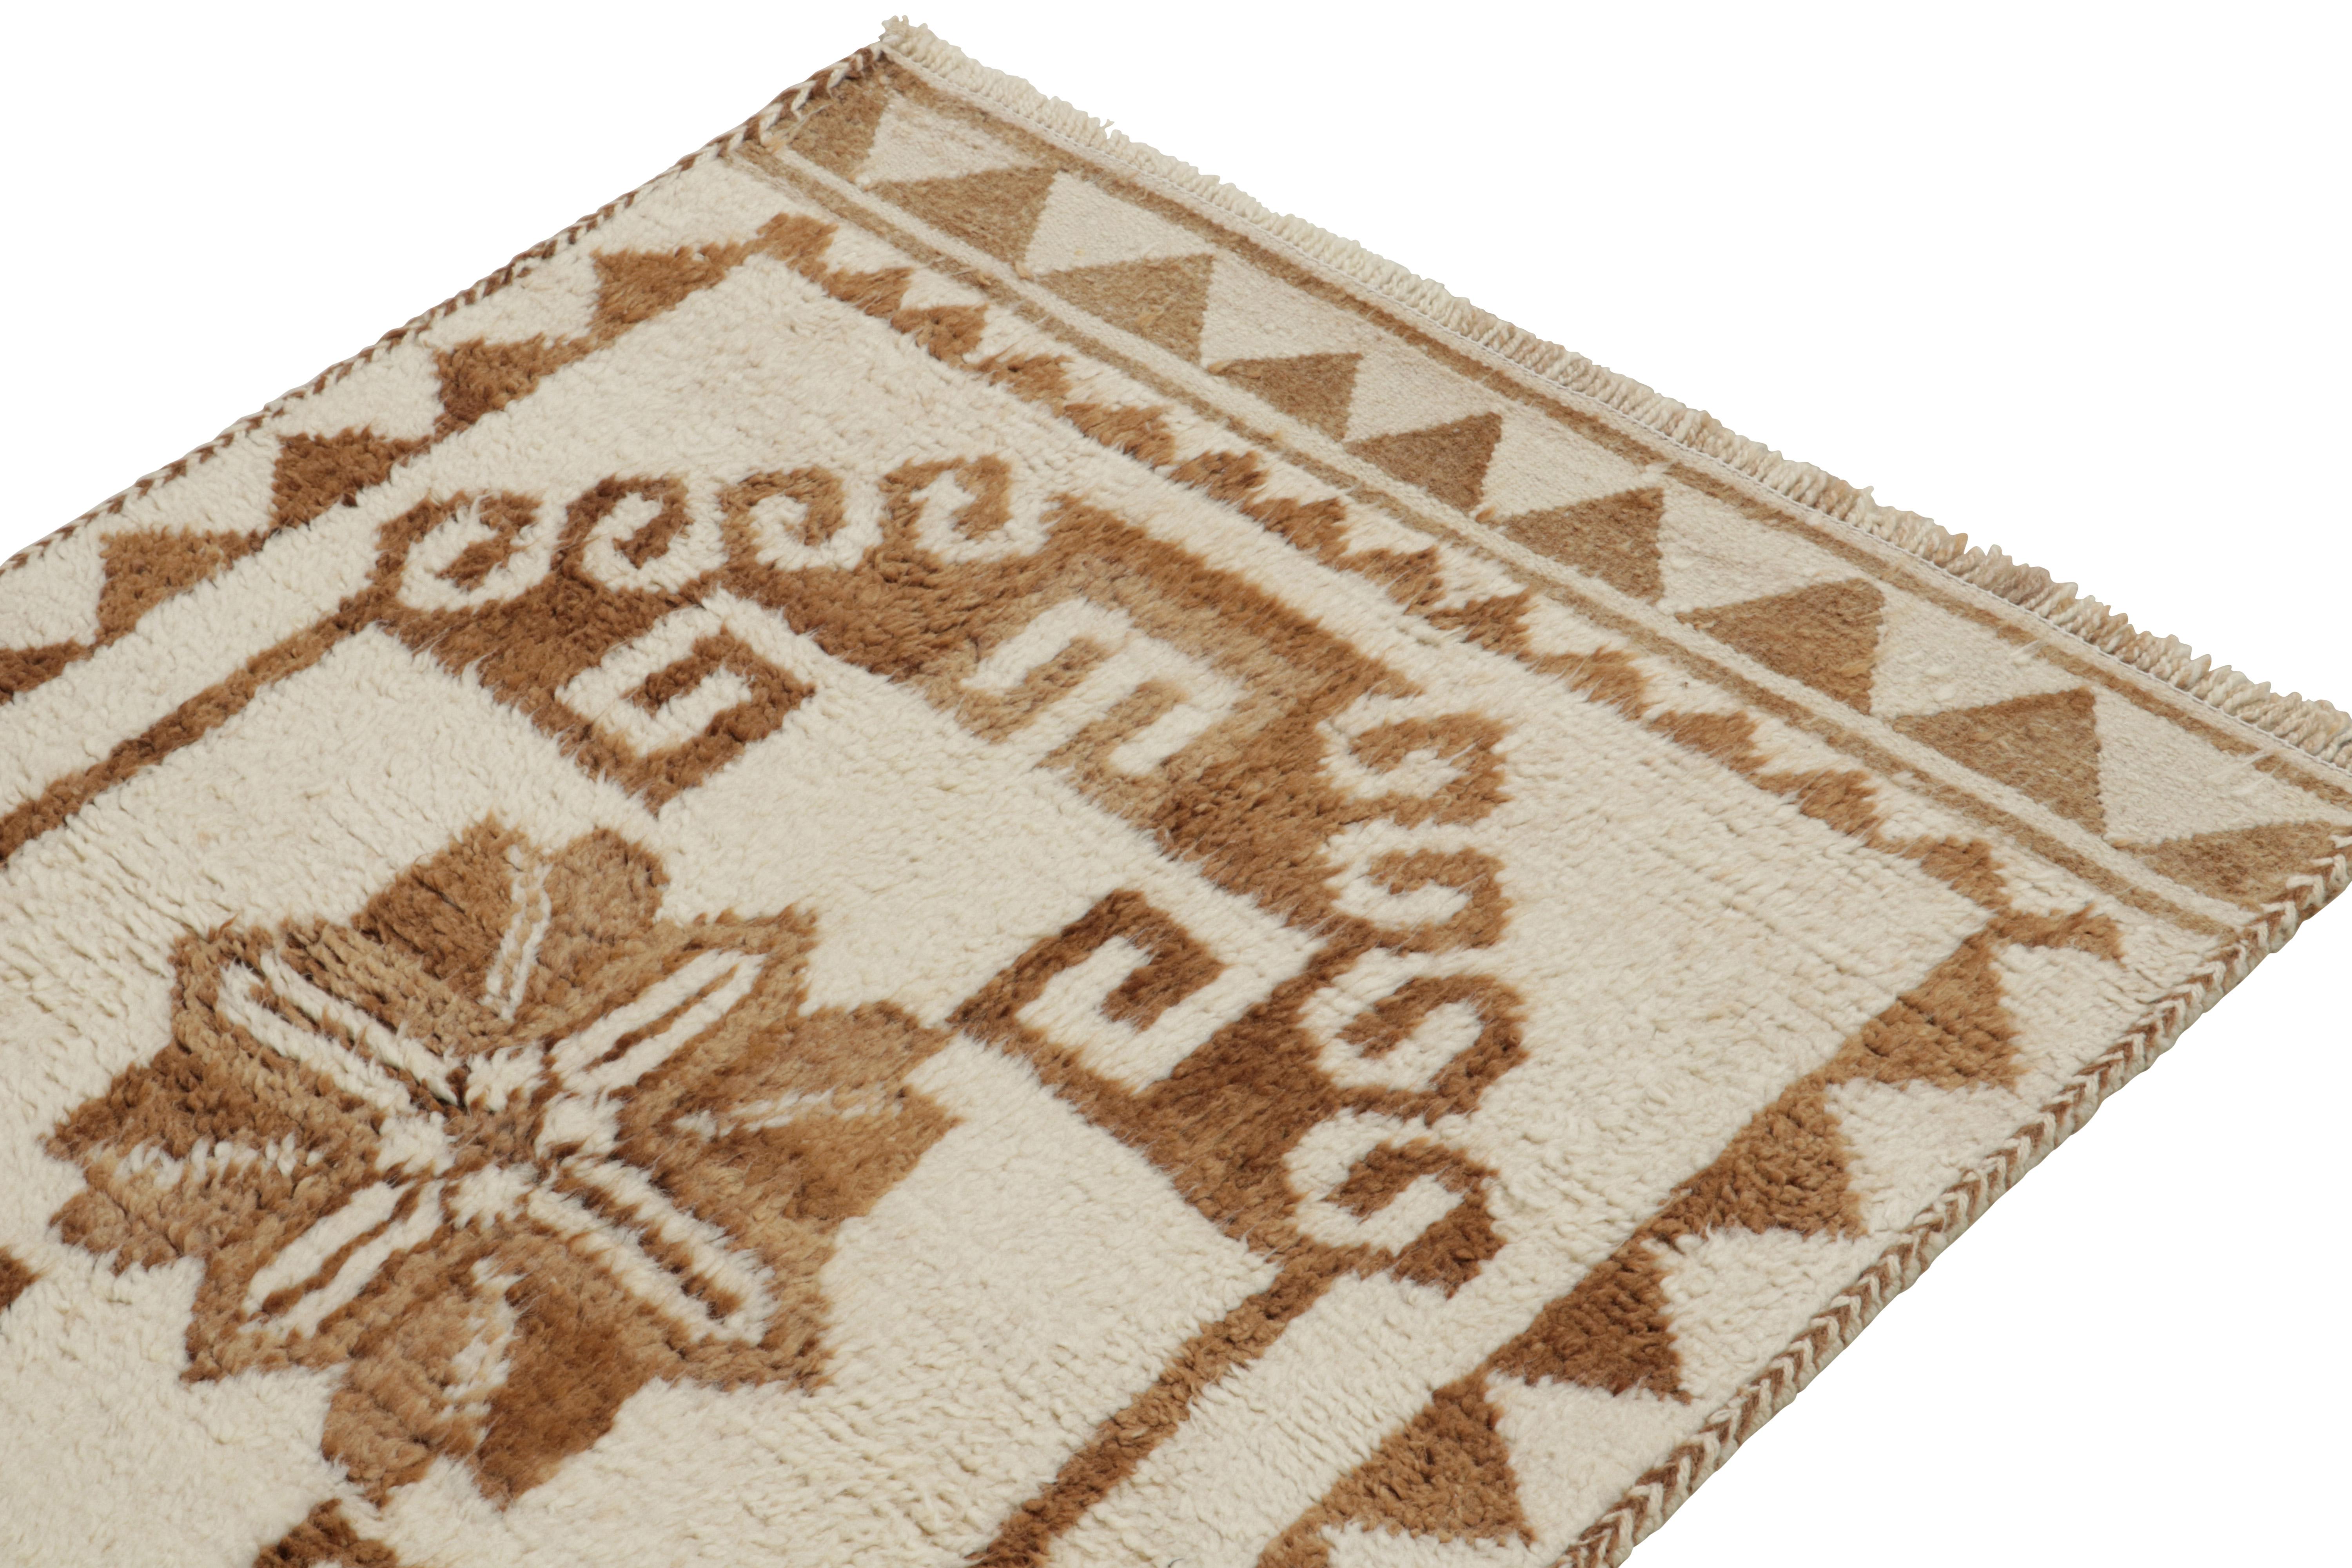 Mid-20th Century Vintage Tribal Runner in White & Beige-Brown Geometric Patterns by Rug & Kilim For Sale